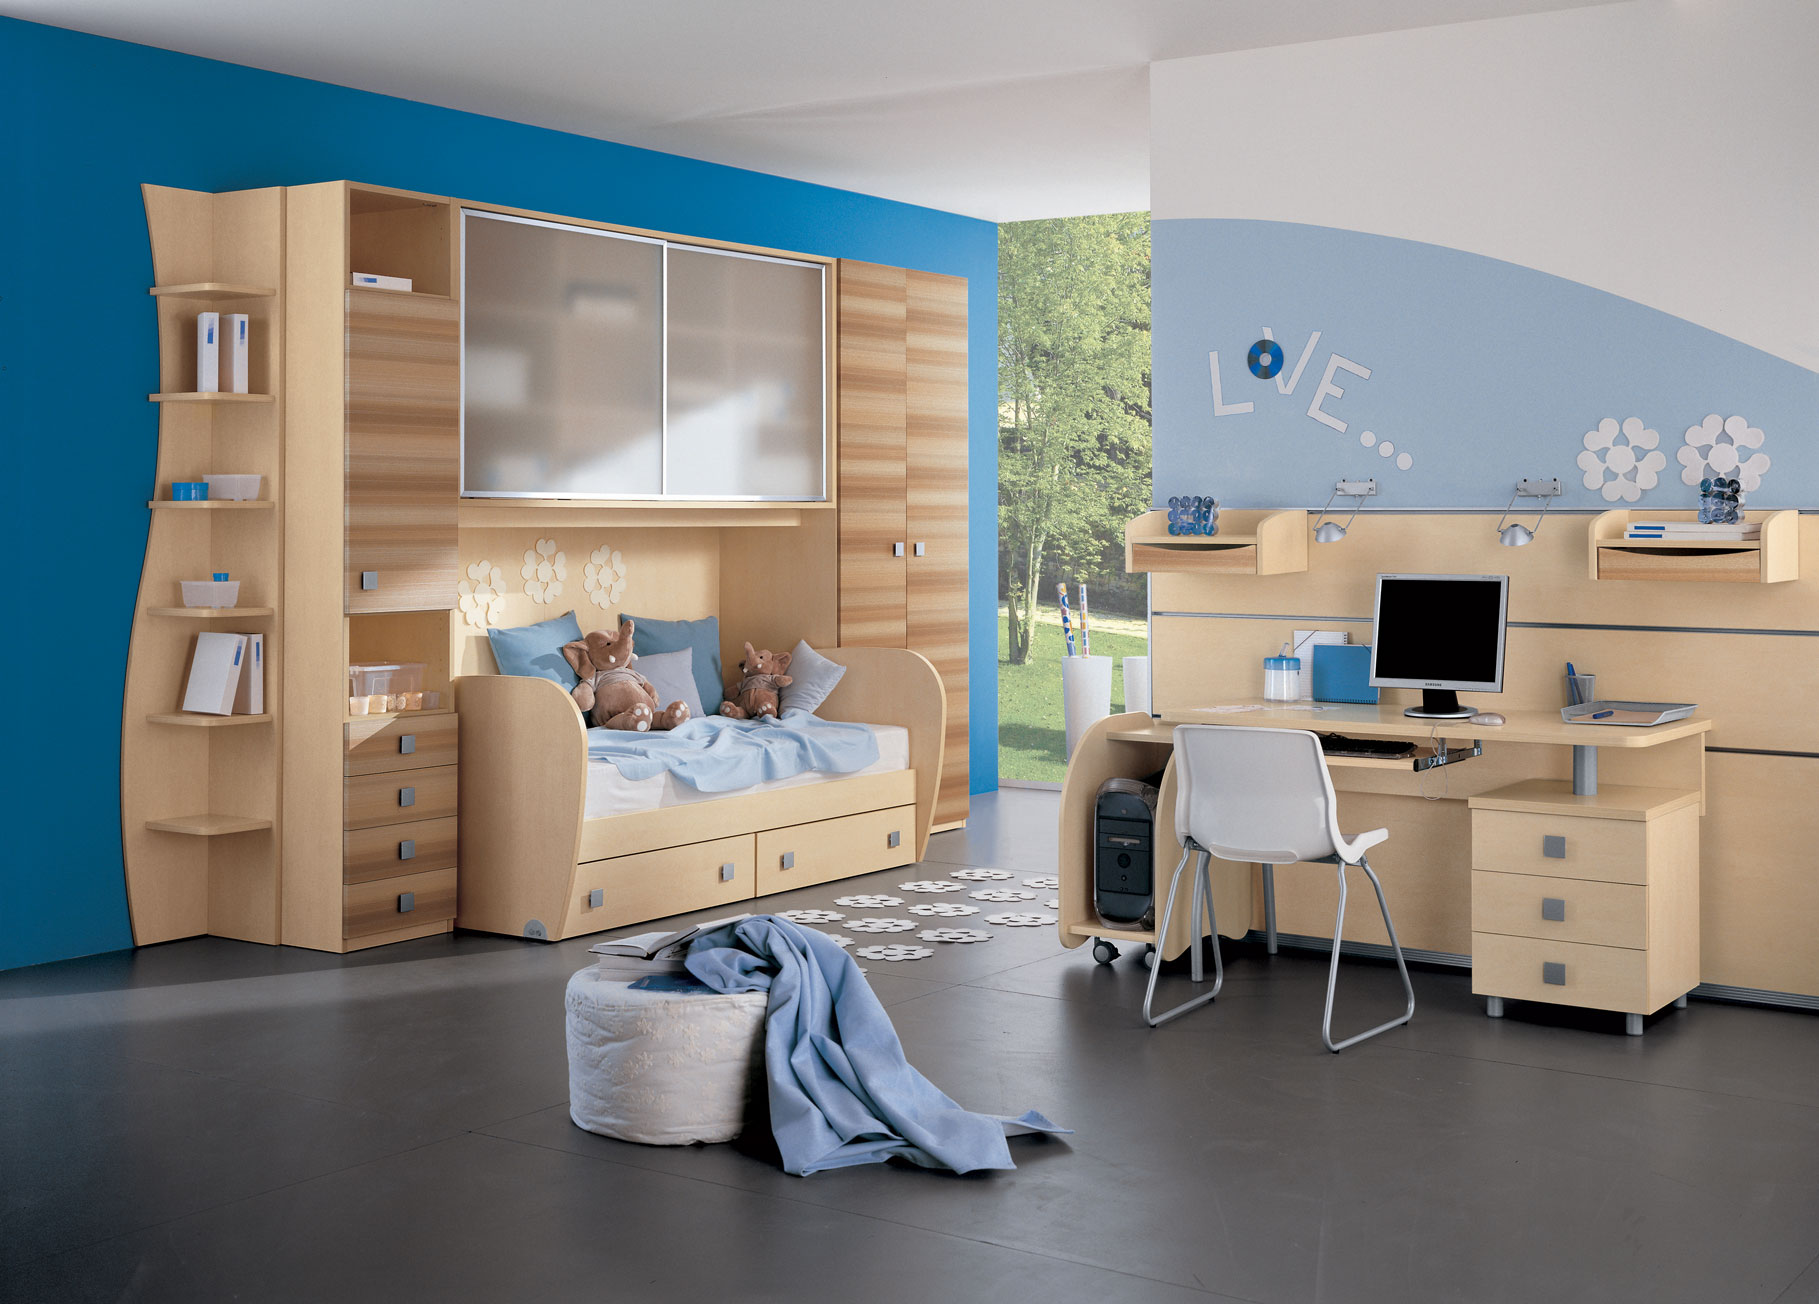 Contemporary Kids Desk Admirable Contemporary Kids Bedroom With Desk Sets Plus Chair And Wall Cabinet Completed With Singe Bed And Cupboards Also Furnished With Kids Room Storage Kids Room The Two Ideas For Making The Kids Room Storage